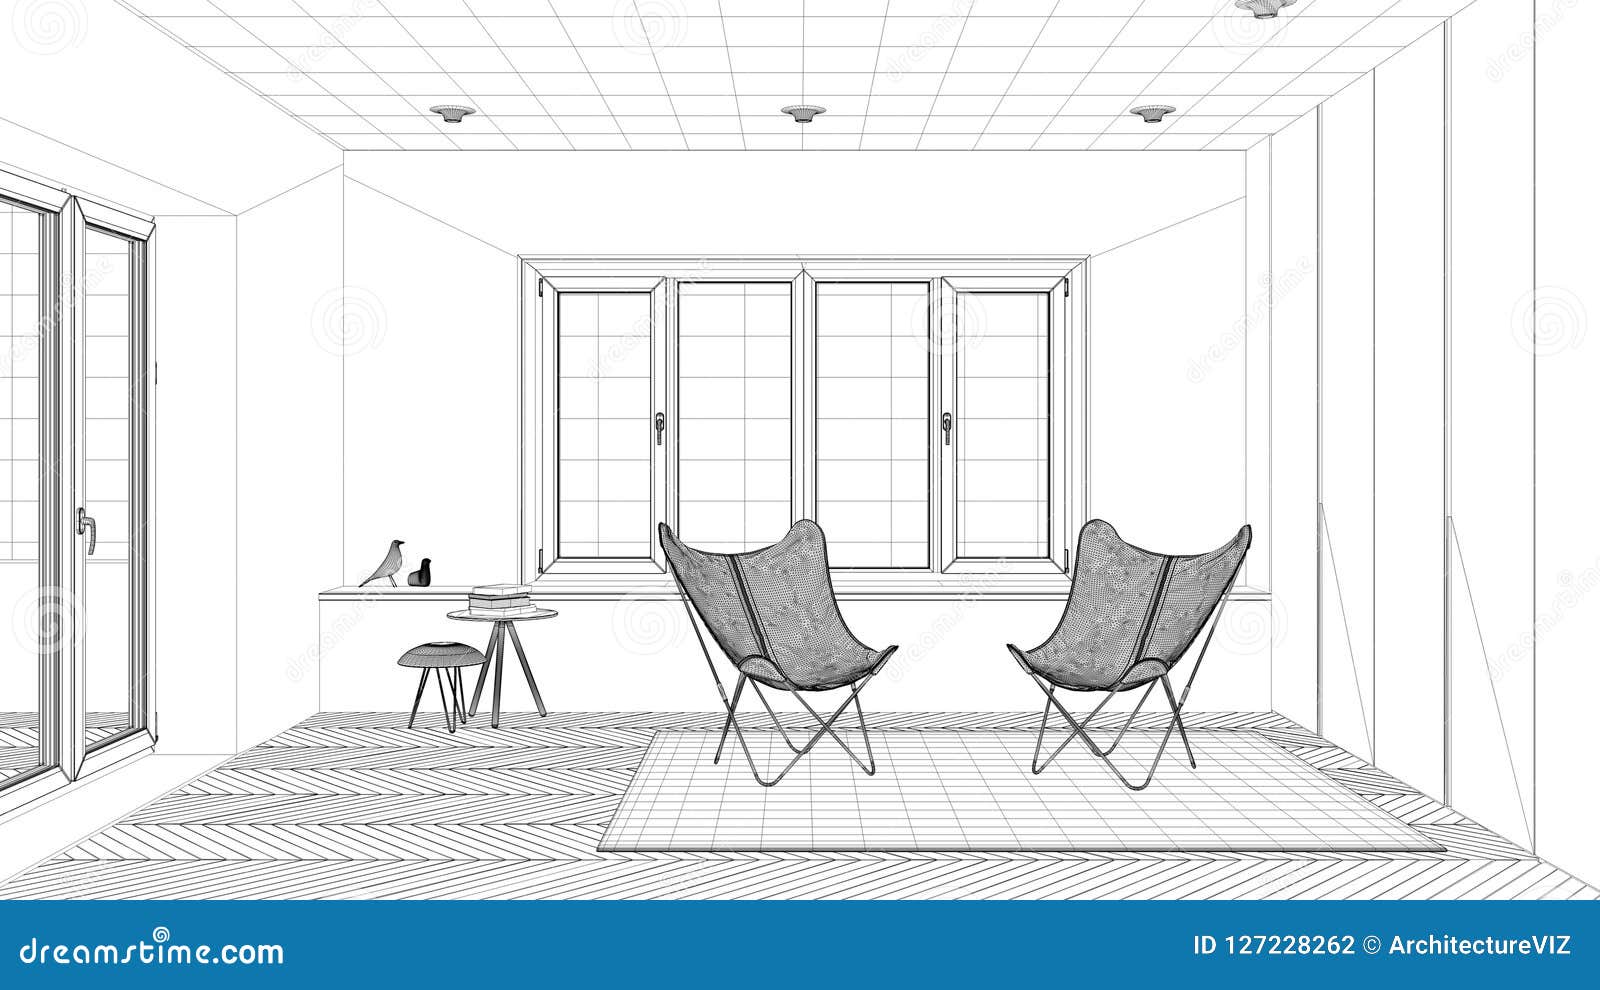 Free Download: Sketching Guide for Interior Design Projects | Domestika